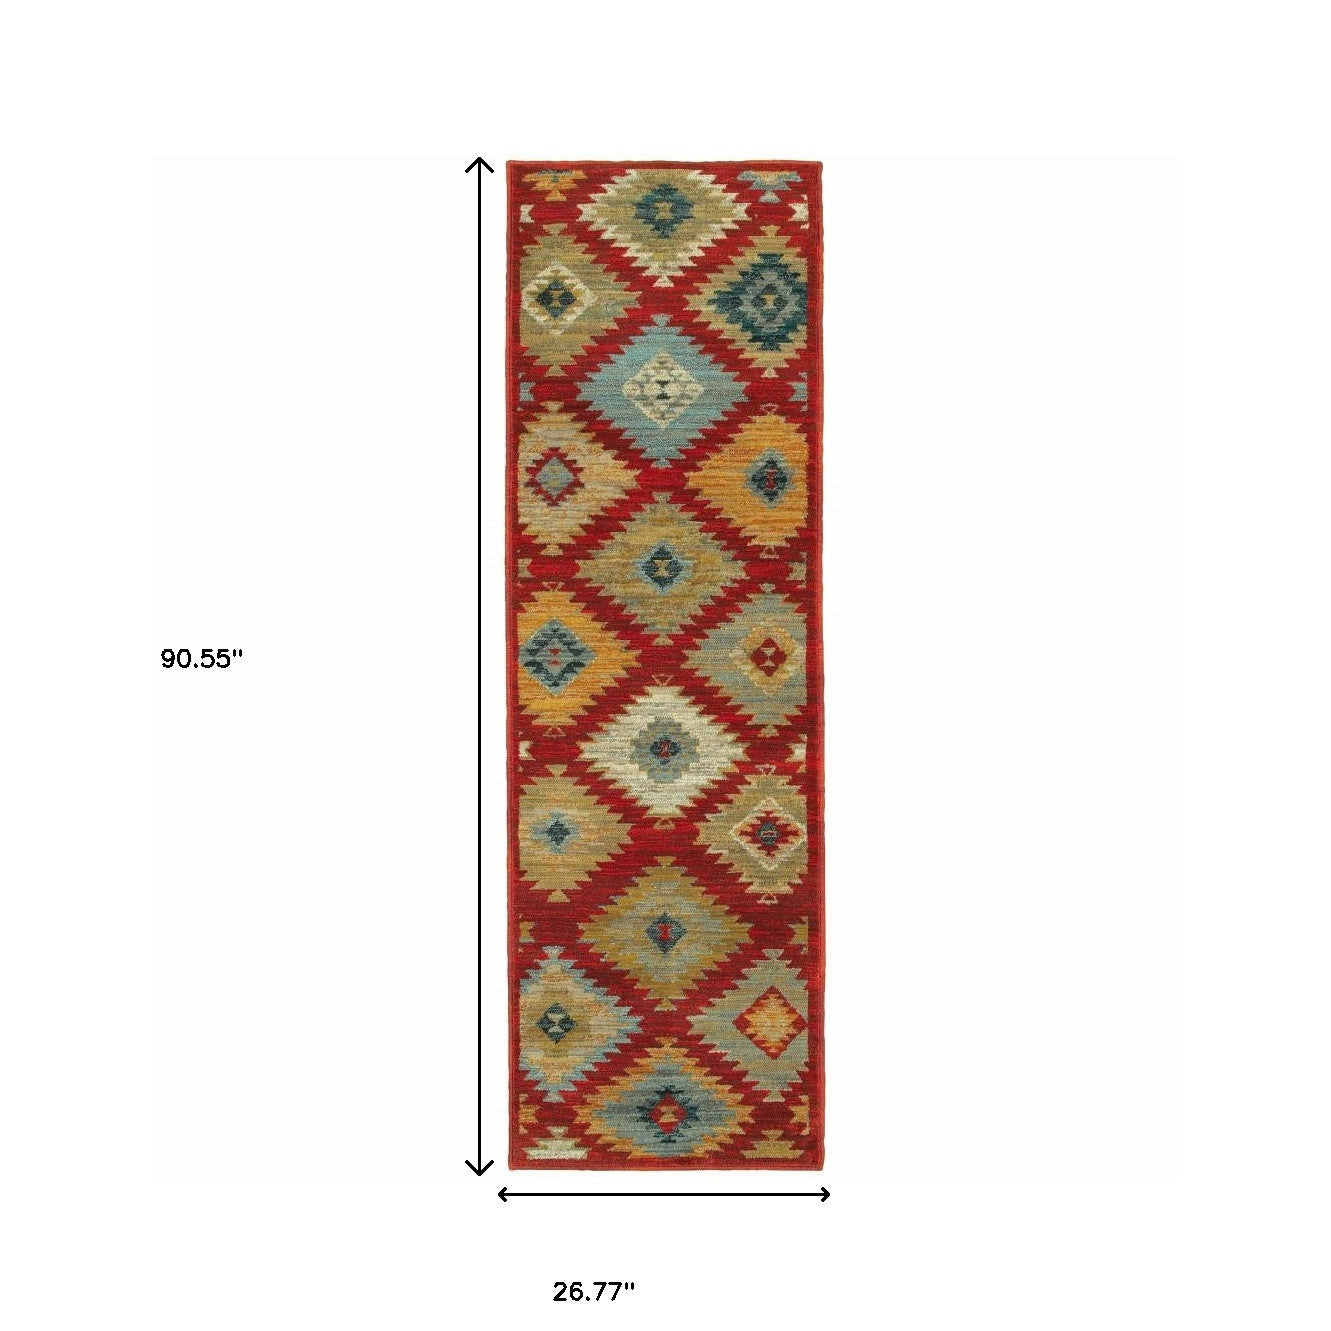 2' X 8' Red Green Gold Blue Teal And Ivory Geometric Power Loom Stain Resistant Runner Rug